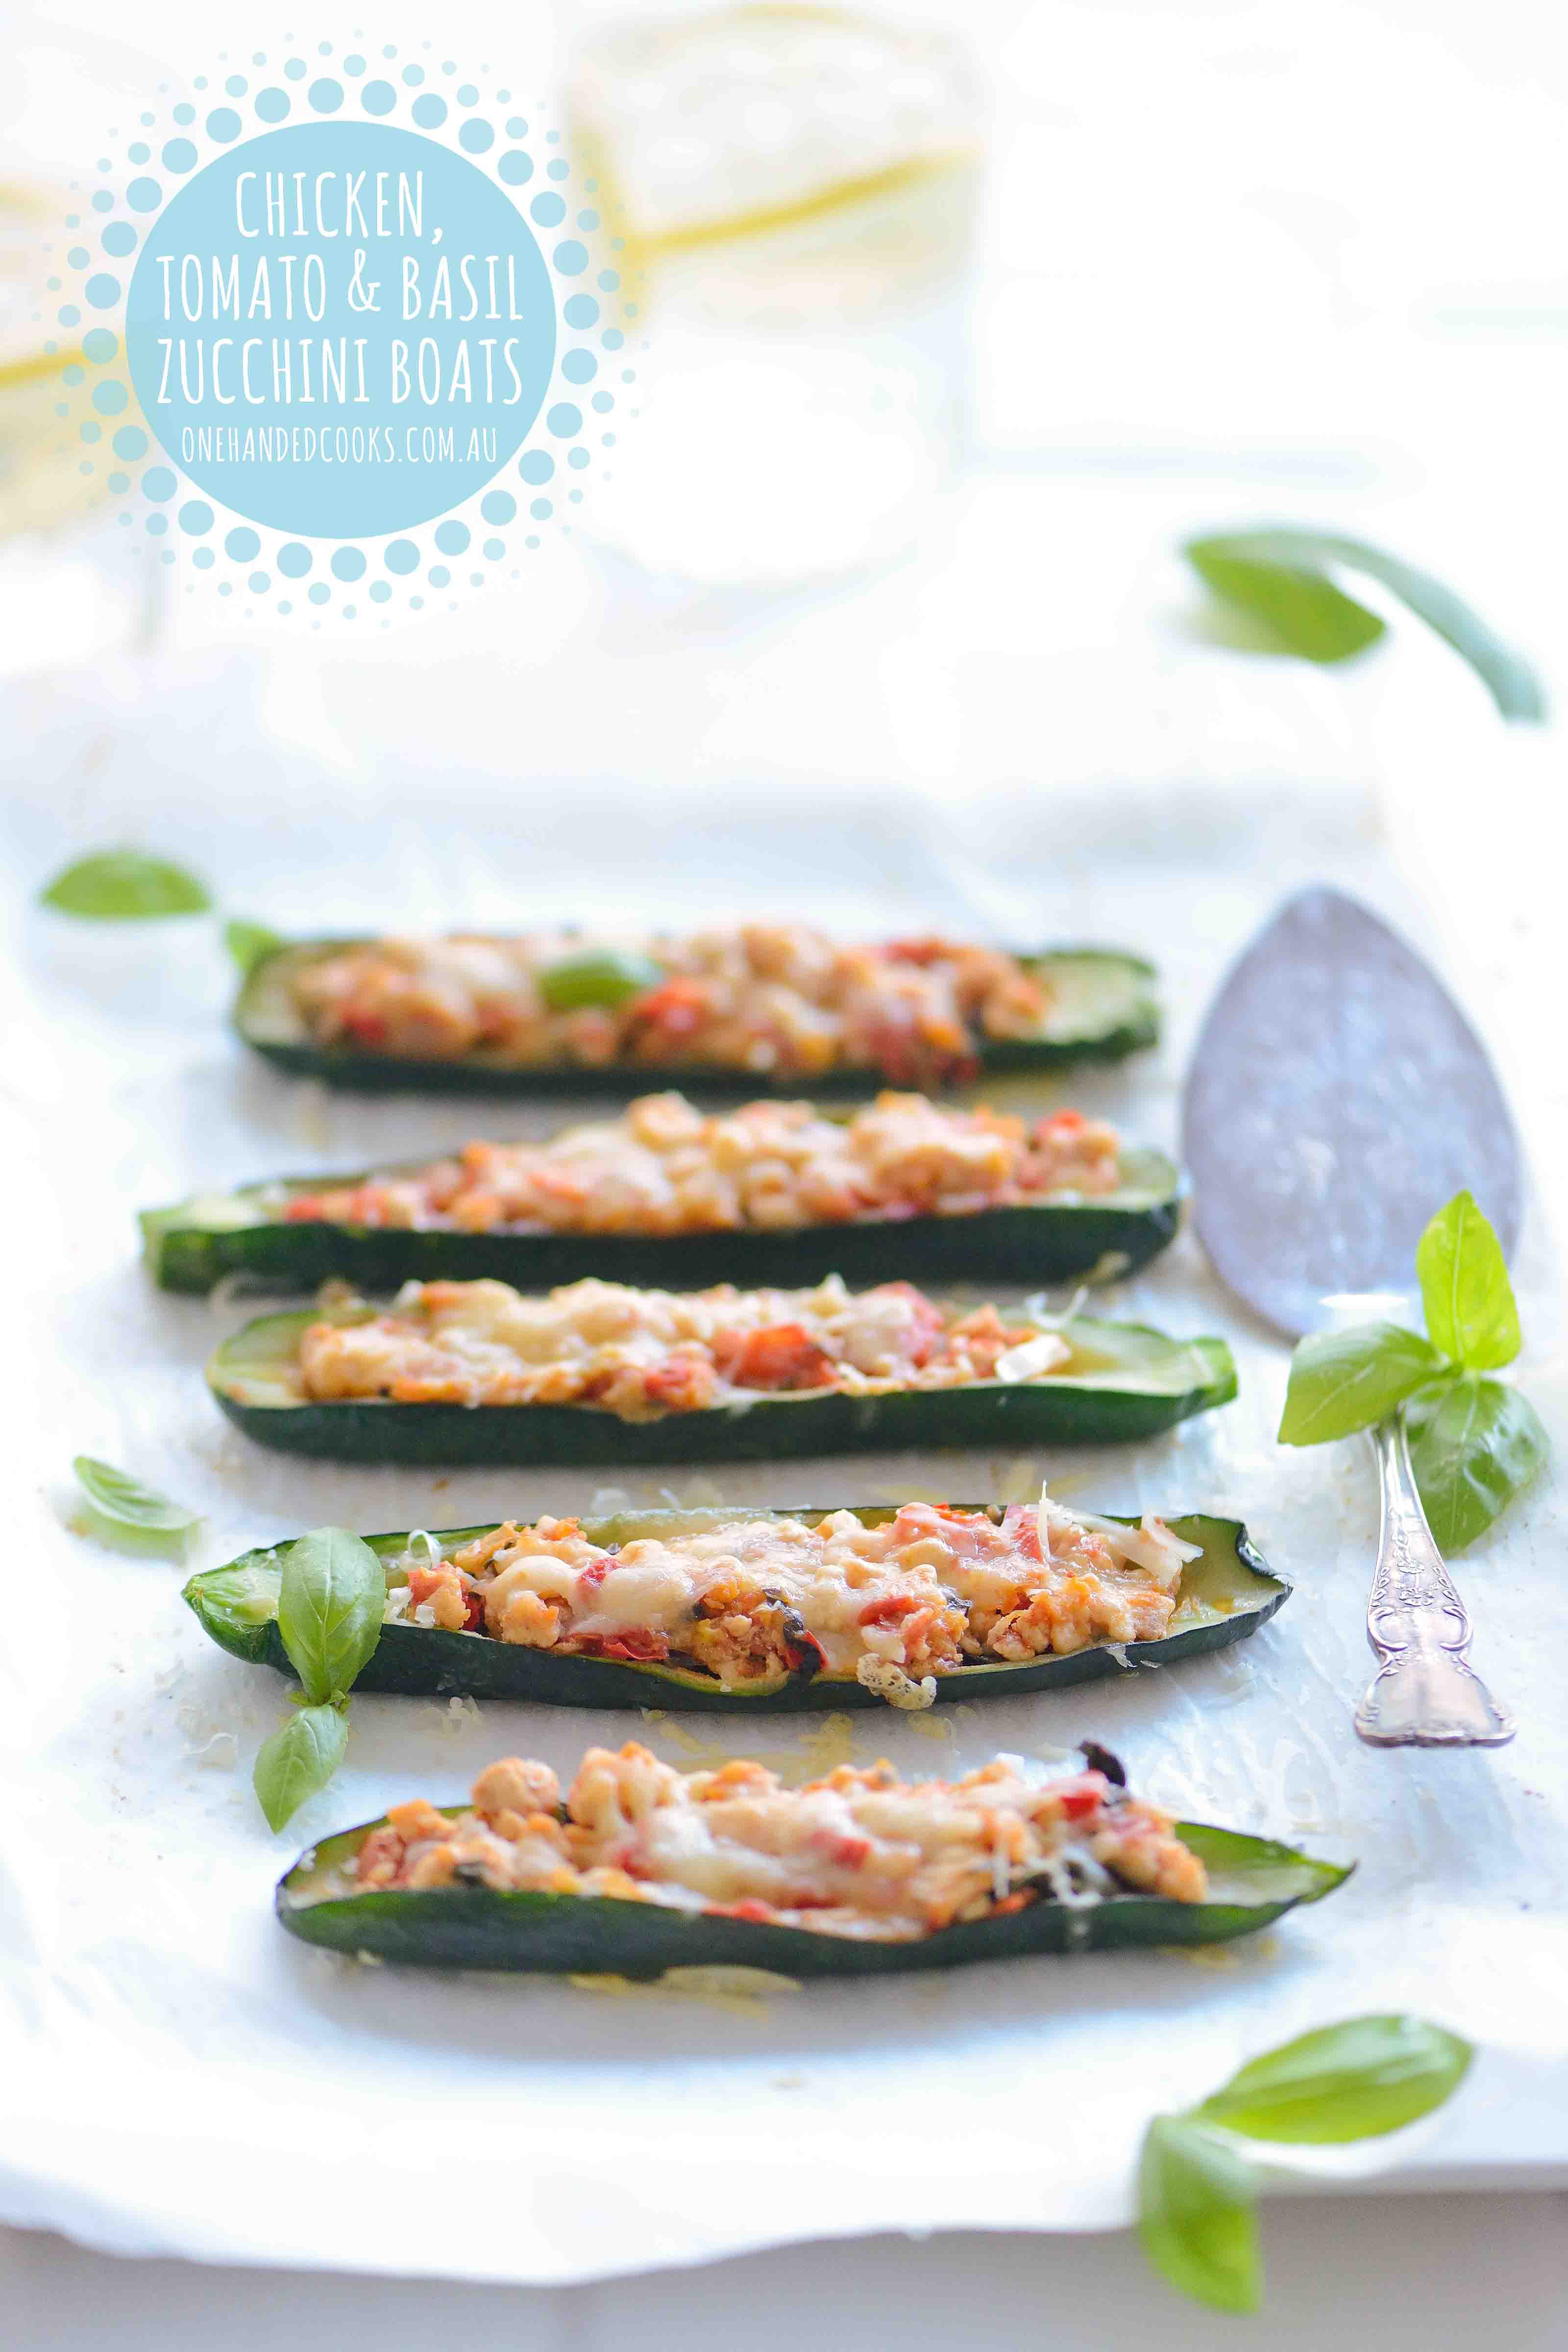 Chicken, Tomato and Basil Zucchini Boats - One Handed Cooks